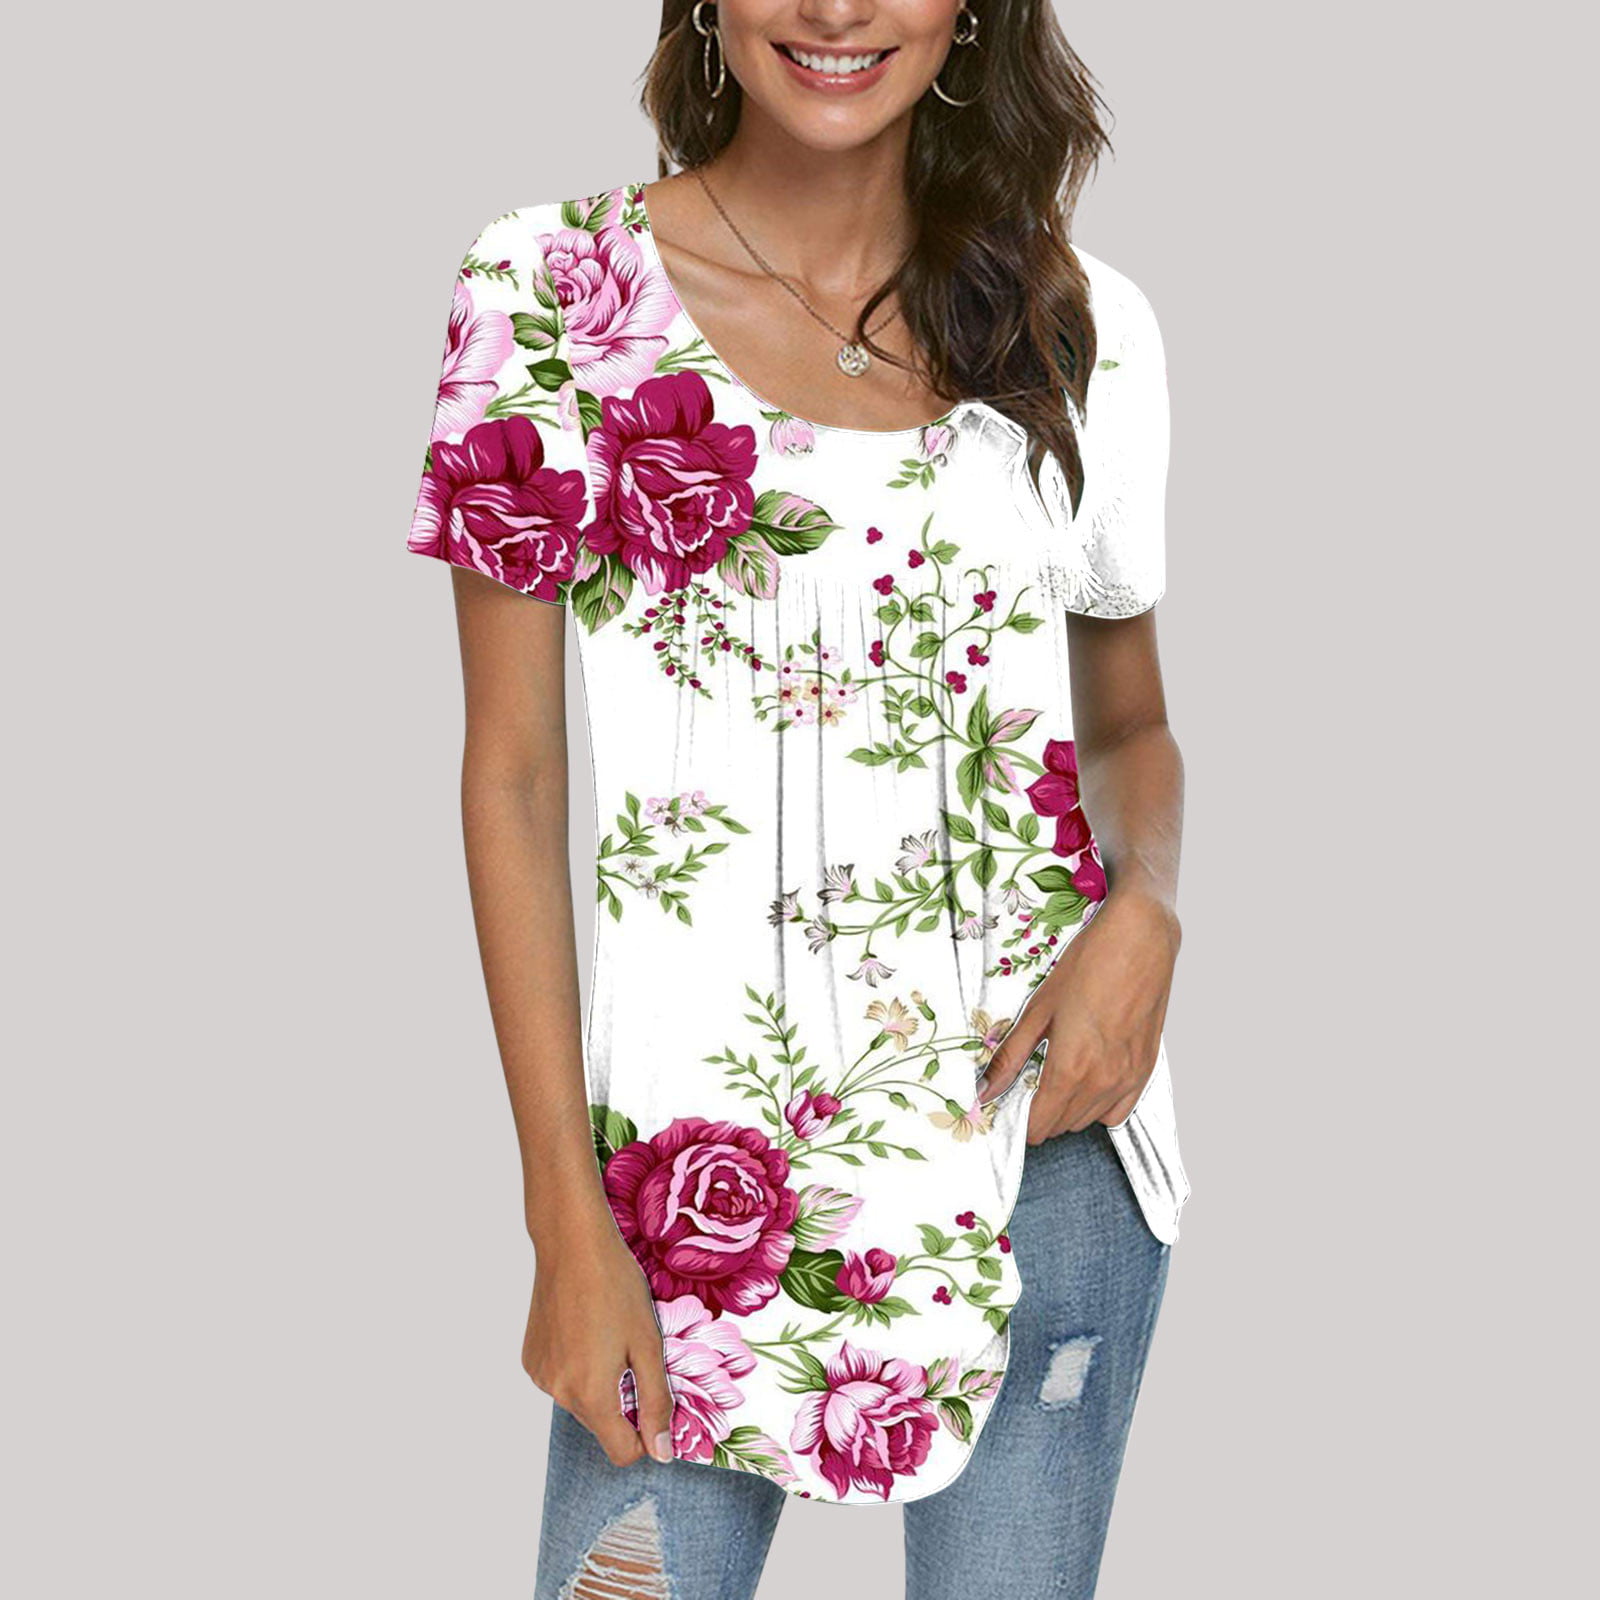 Uorcsa Women's Floral Printed Short Sleeve T Shirts